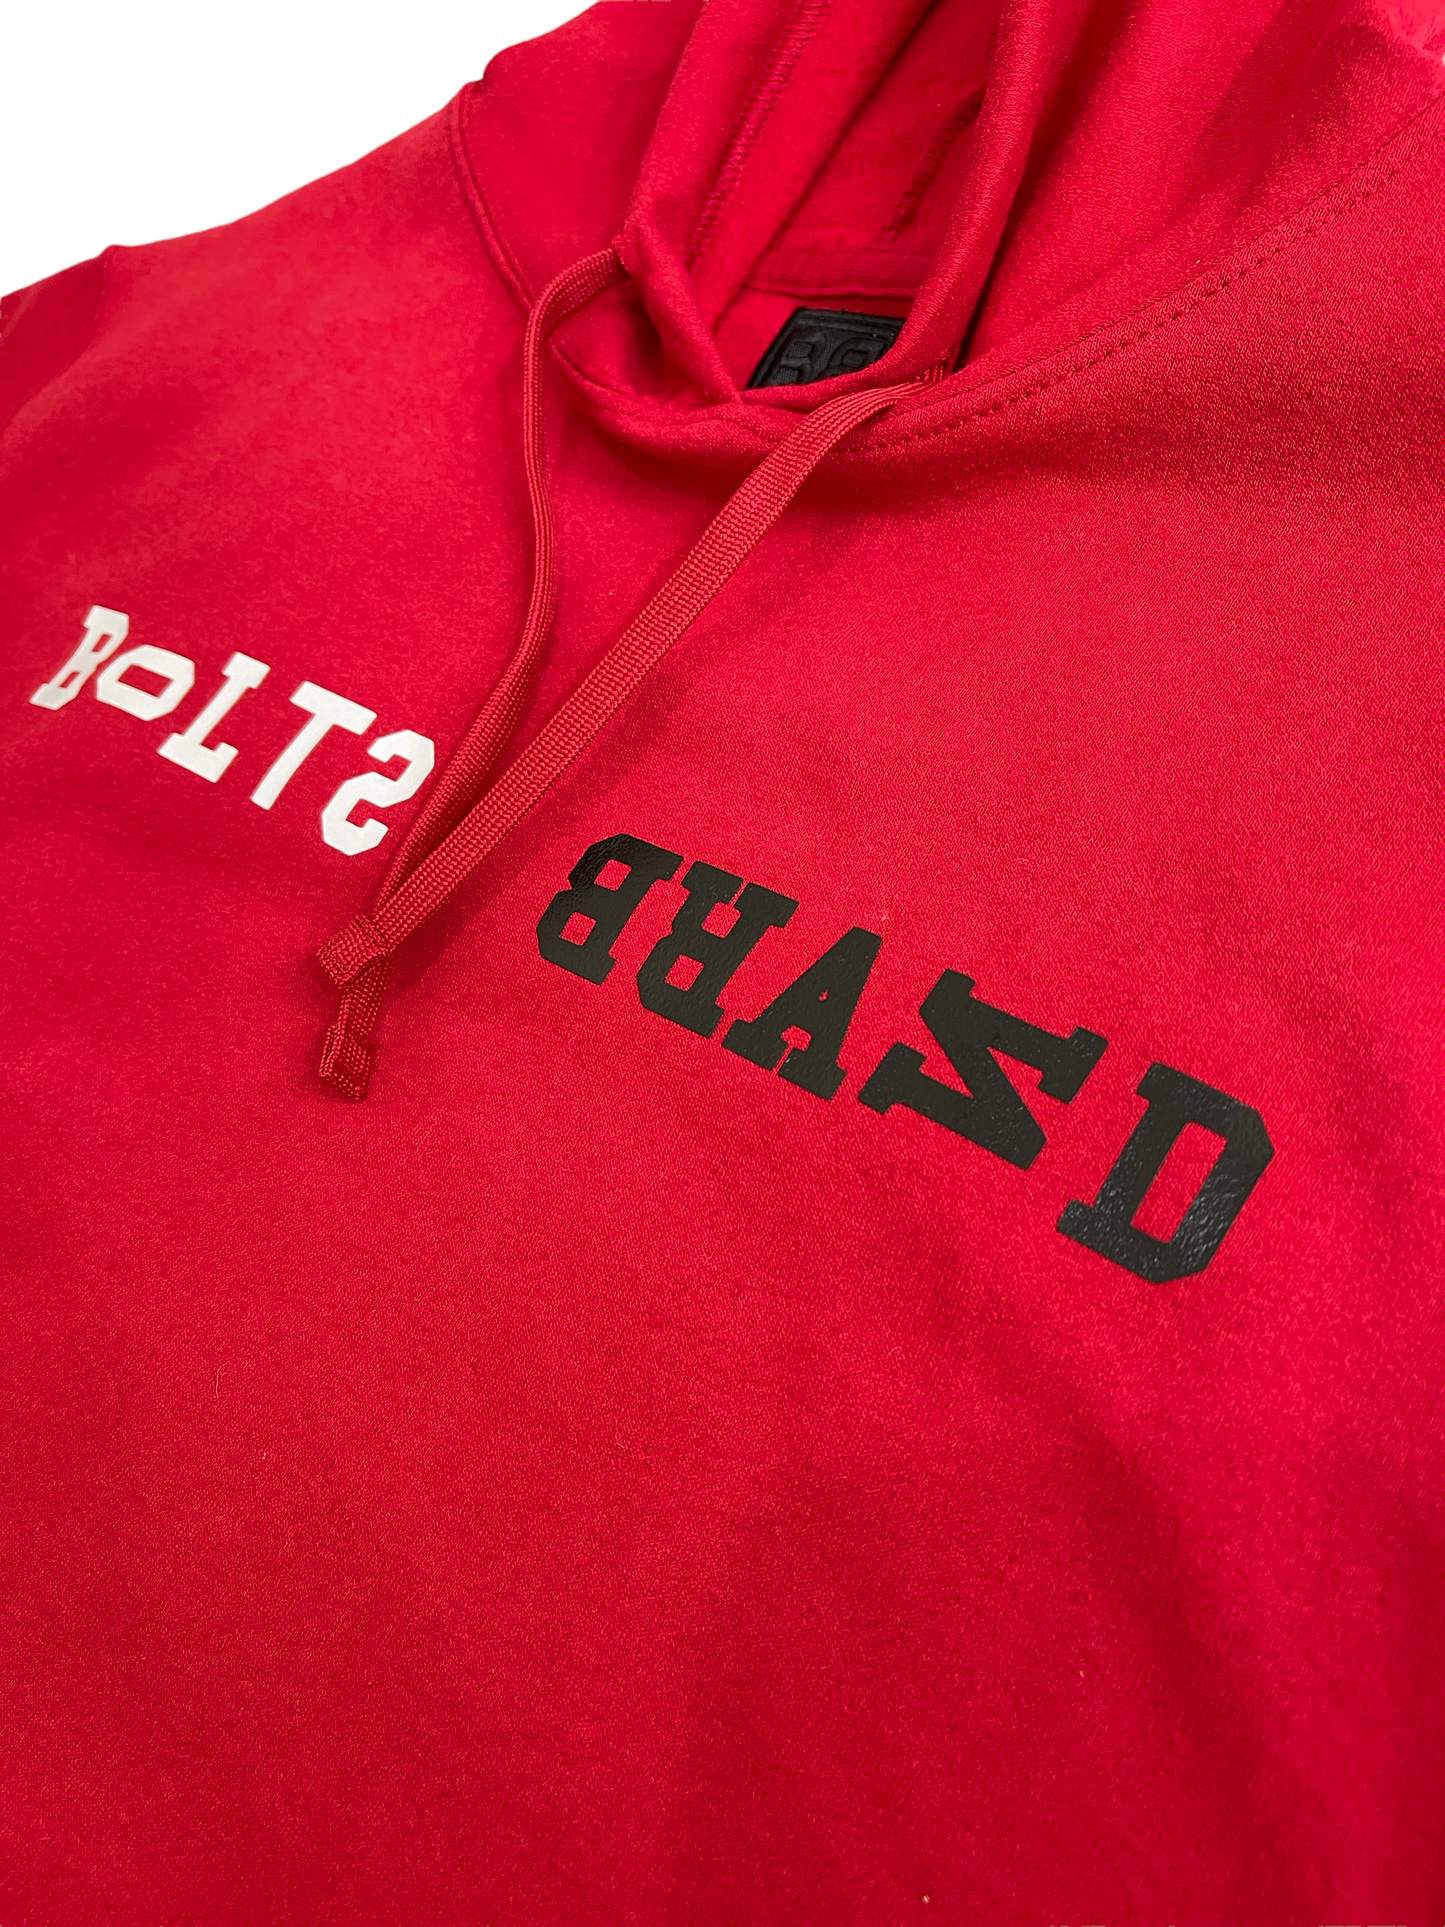 Bolts brand red hoodie